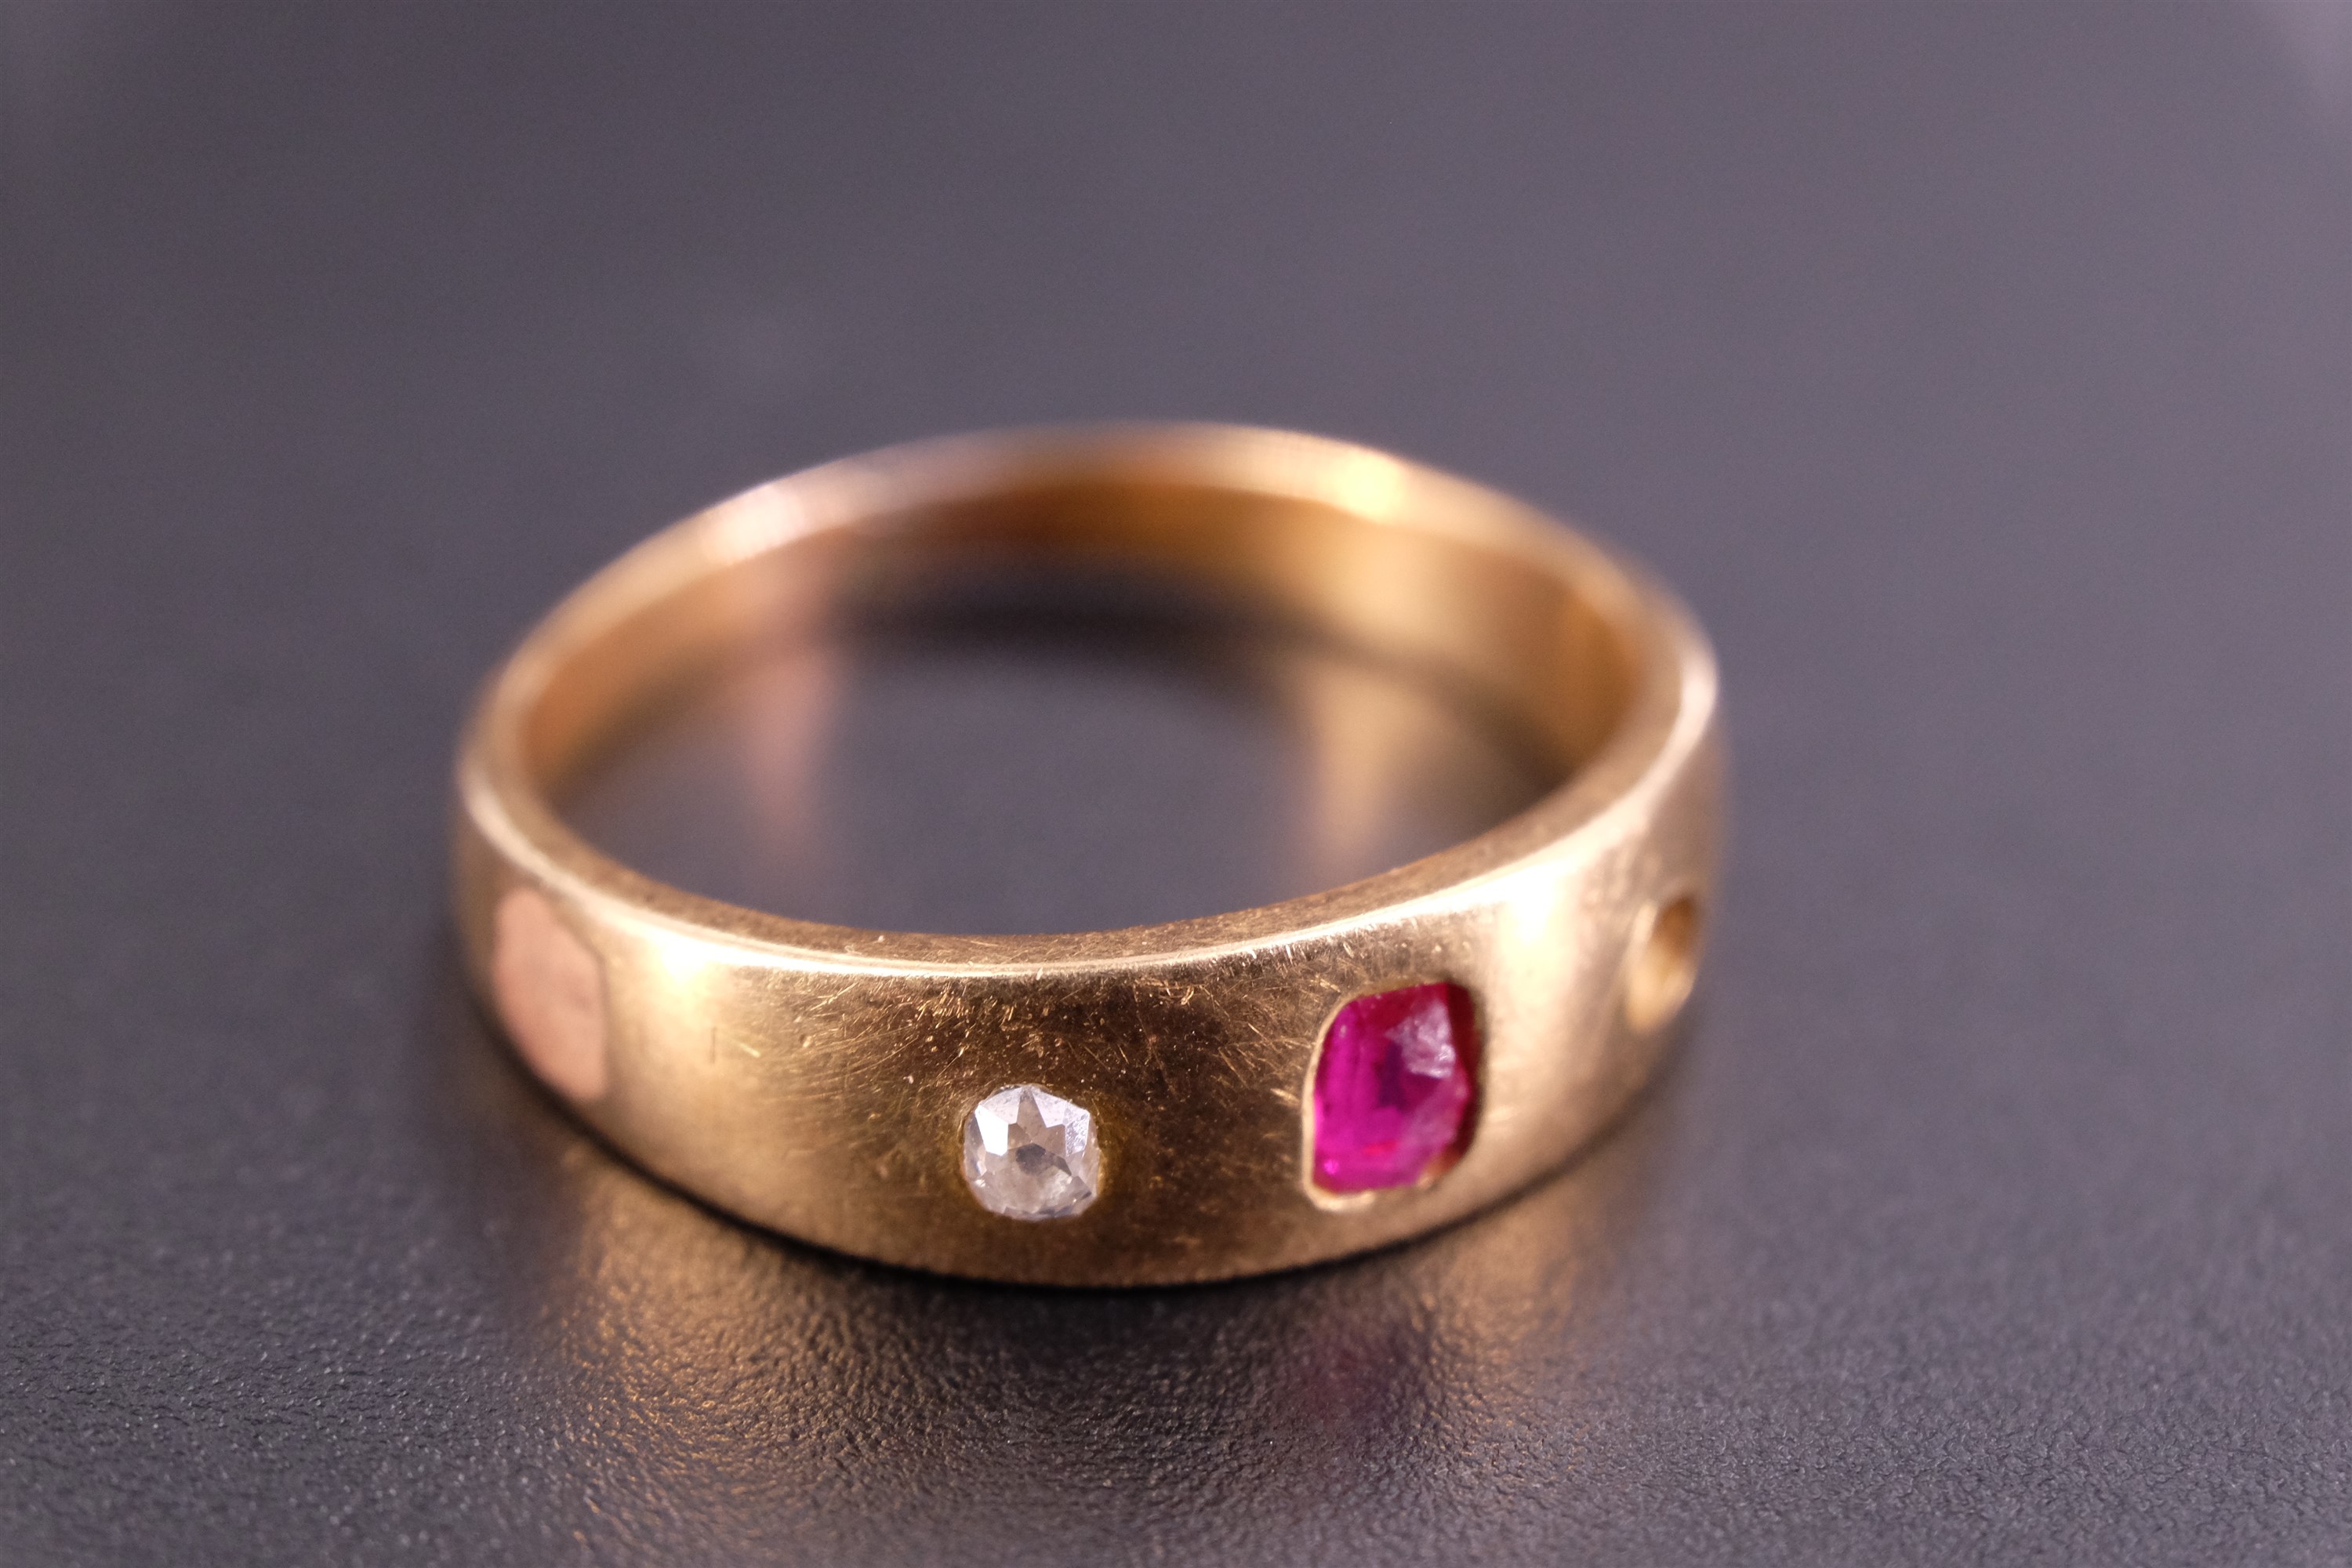 An 18 ct yellow metal, diamond and pink stone finger ring, the stones sunken set on a broad tapering - Image 2 of 4